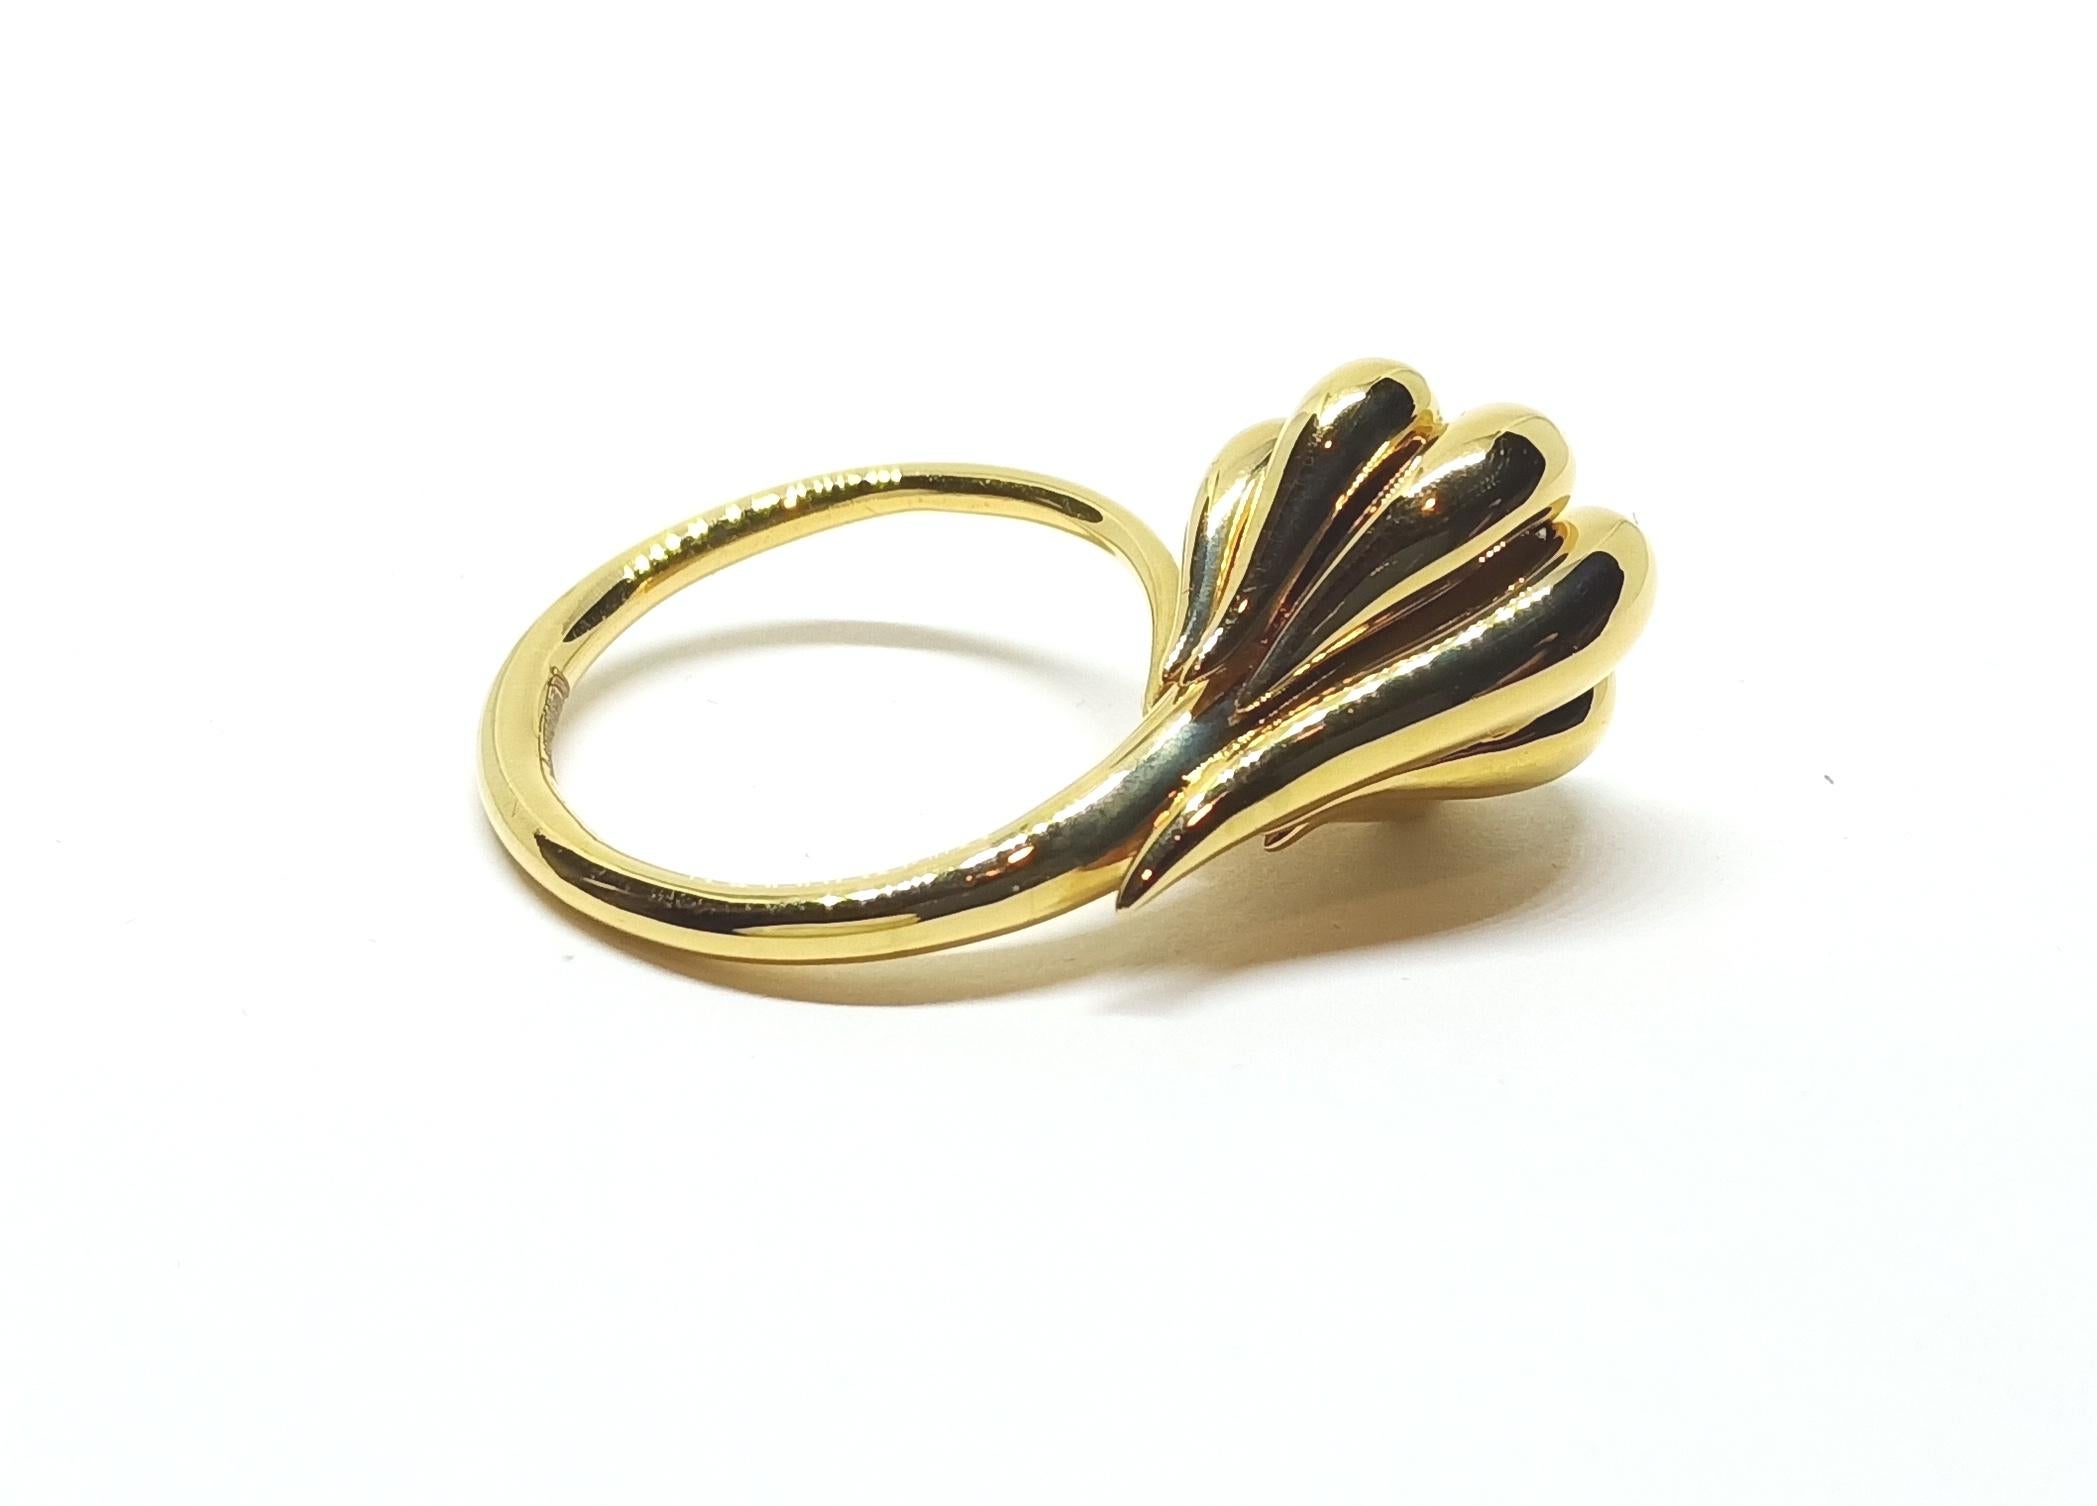 One of a Kind 18 Karat Yellow Gold Ring with Black Rose Cut Diamond For Sale 2